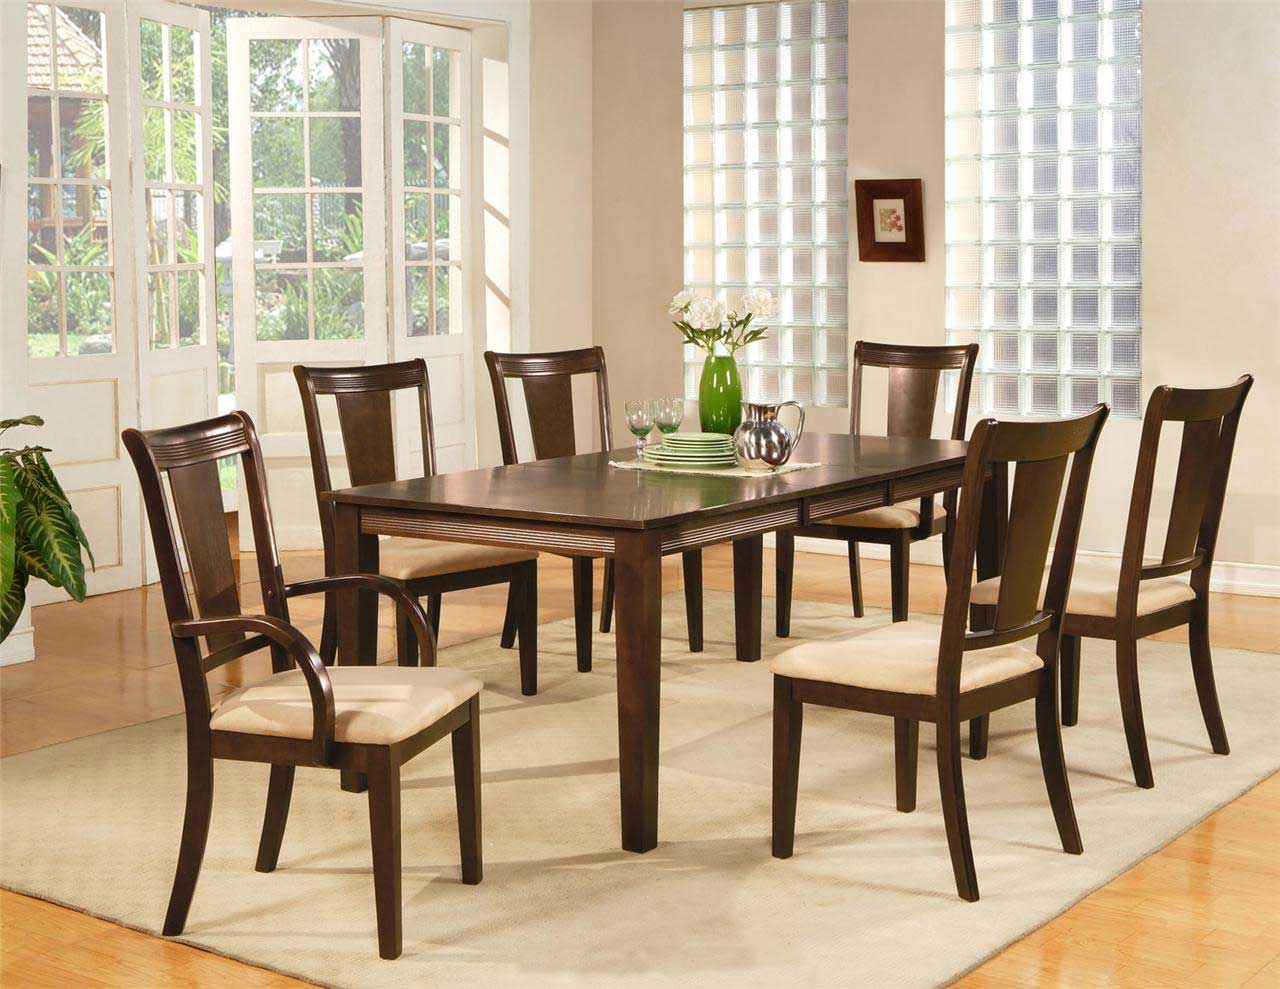 simple dining room pictures